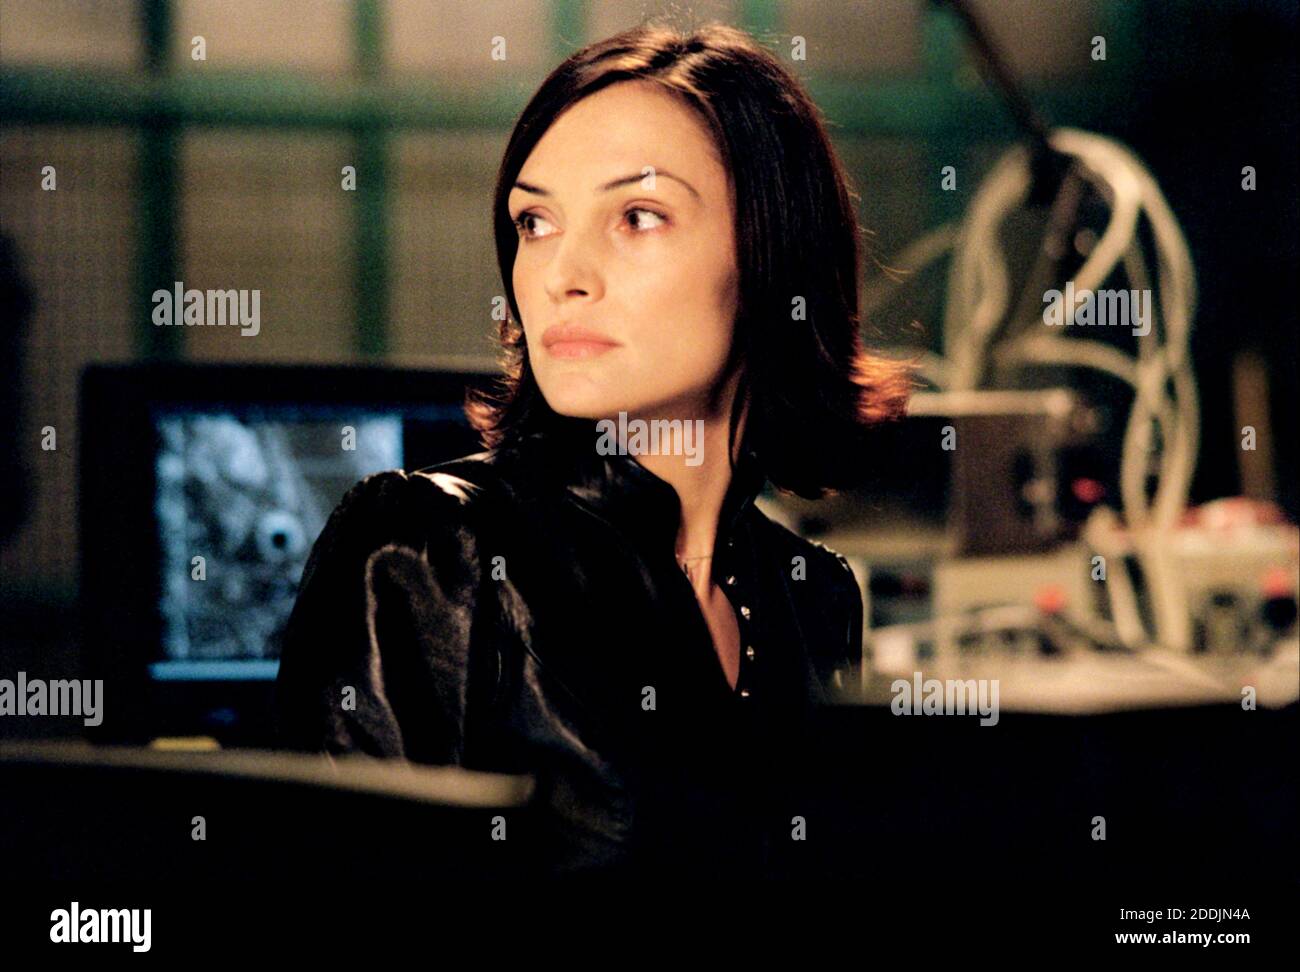 Famke Janssen, 'I-Spy' (2002)  Photo credit: Columbia Pictures / The Hollywood Archive / File Reference # 34078-0358FSTHA Stock Photo